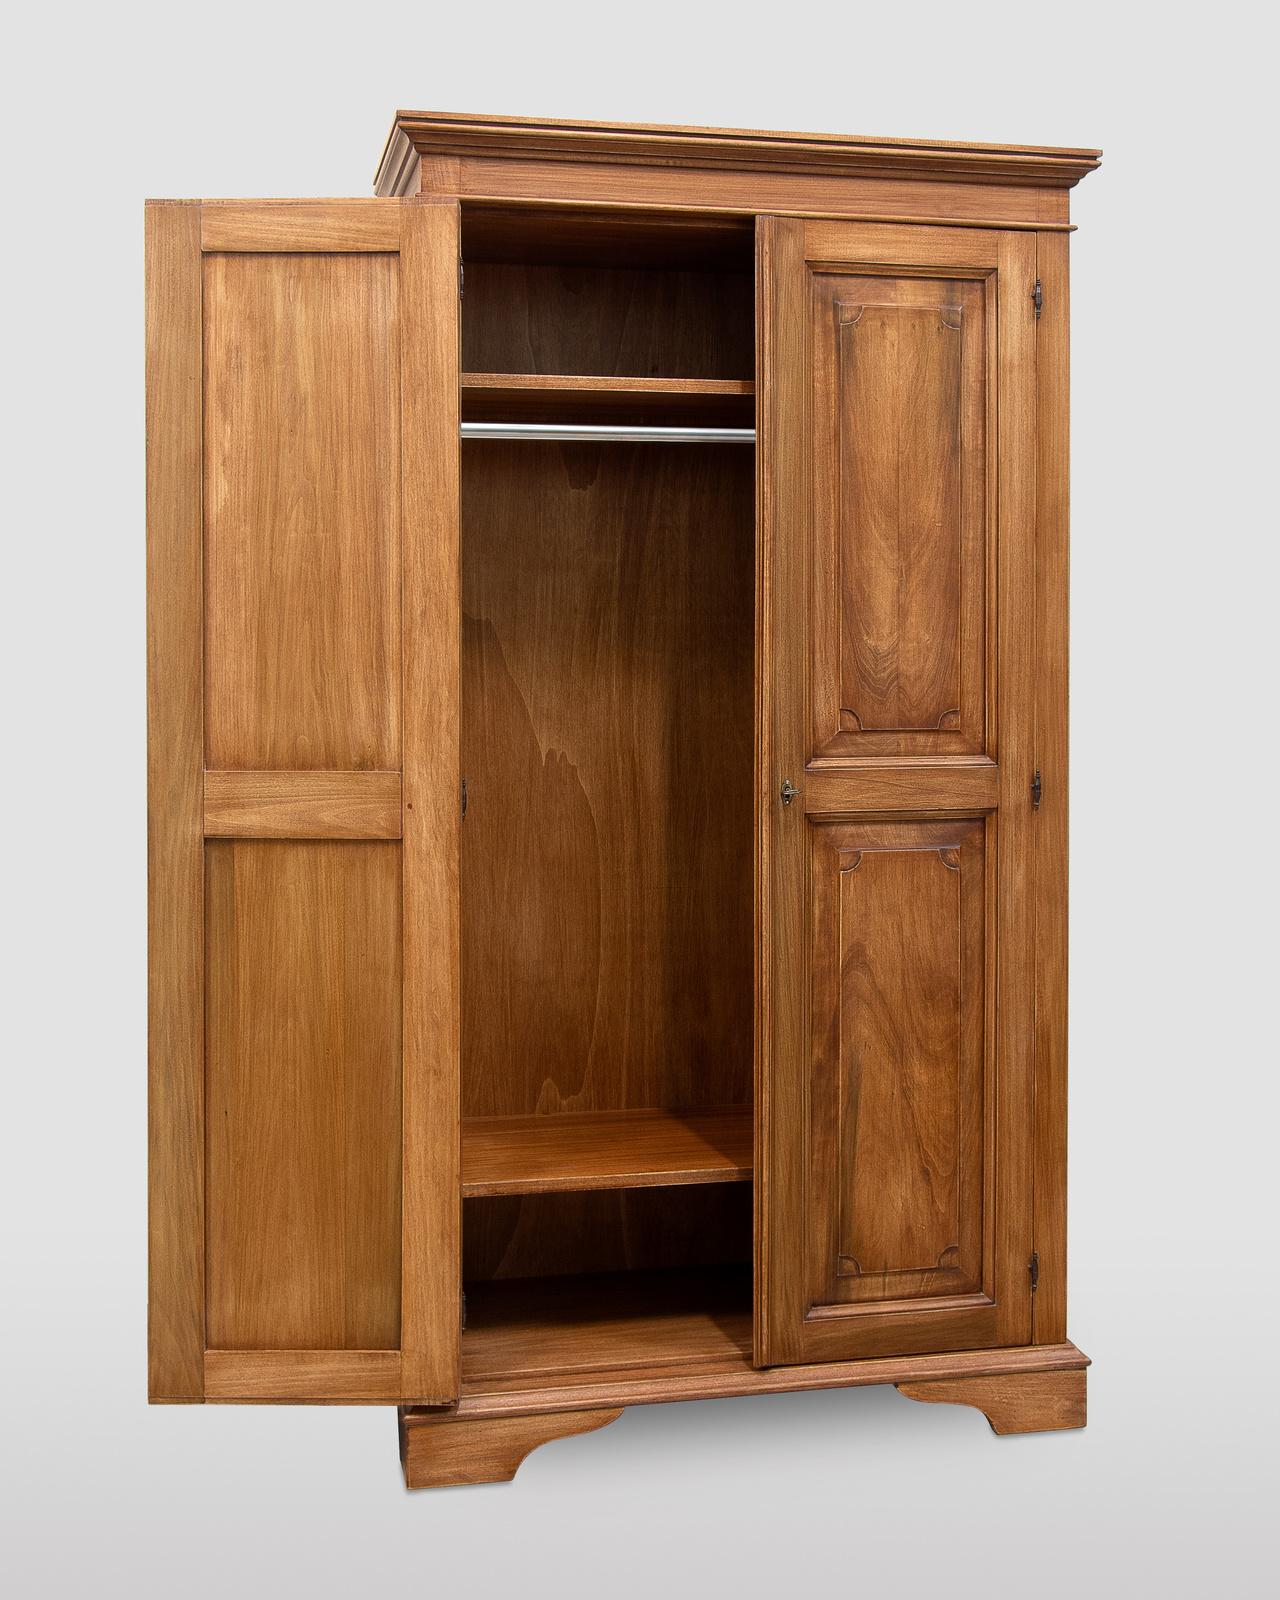 Handcrafted entirely of solid tulipwood stained walnut using non-toxic lacquers, this closet will impeccably complement rustic bedrooms. It is an exquisite example of masterful cabinet-making techniques, evident in the fine hand-carved details